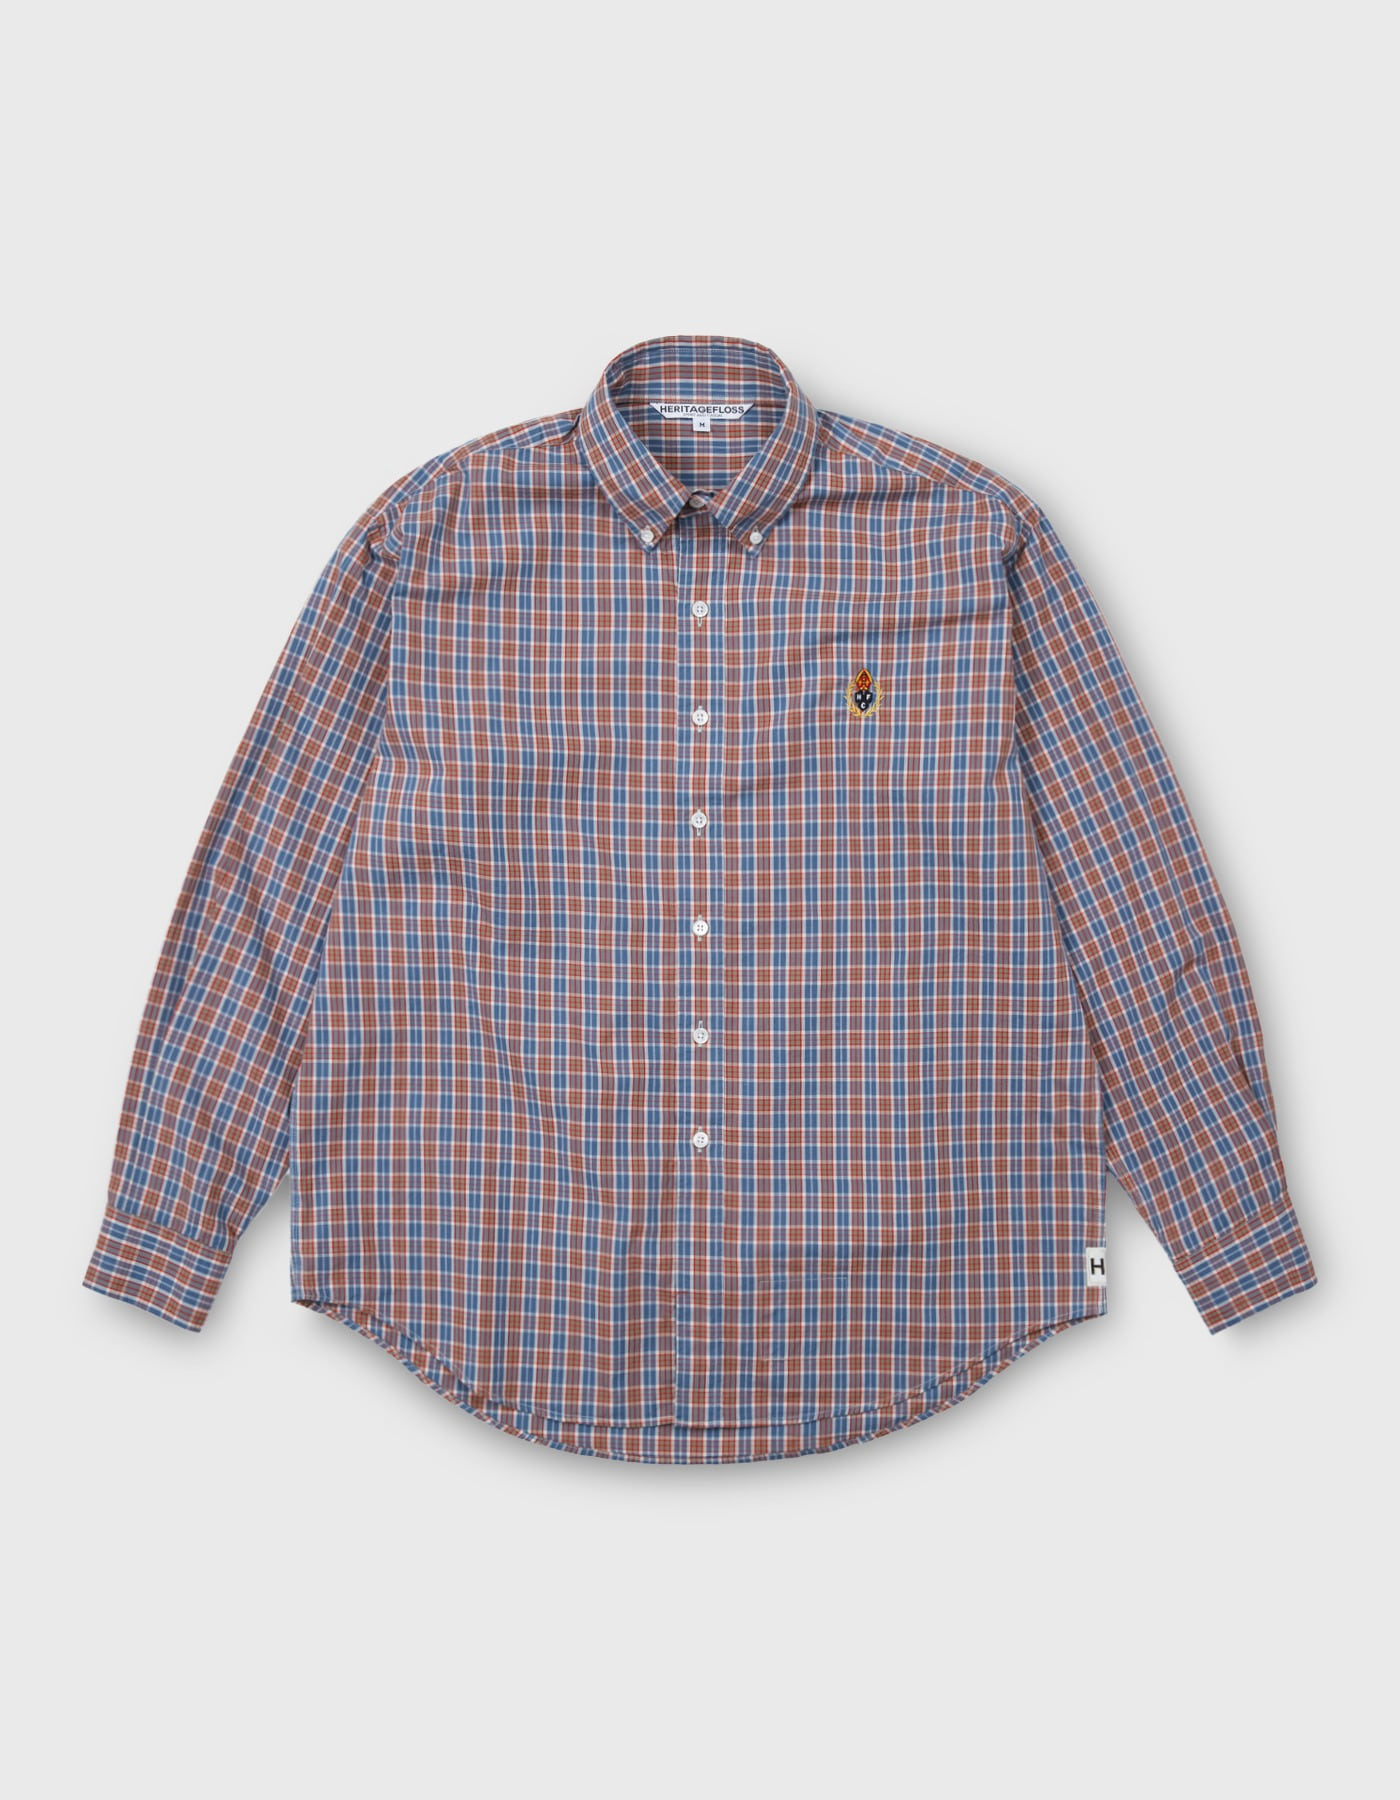 HFC CREST CHECKED SHIRT / Blue-Red